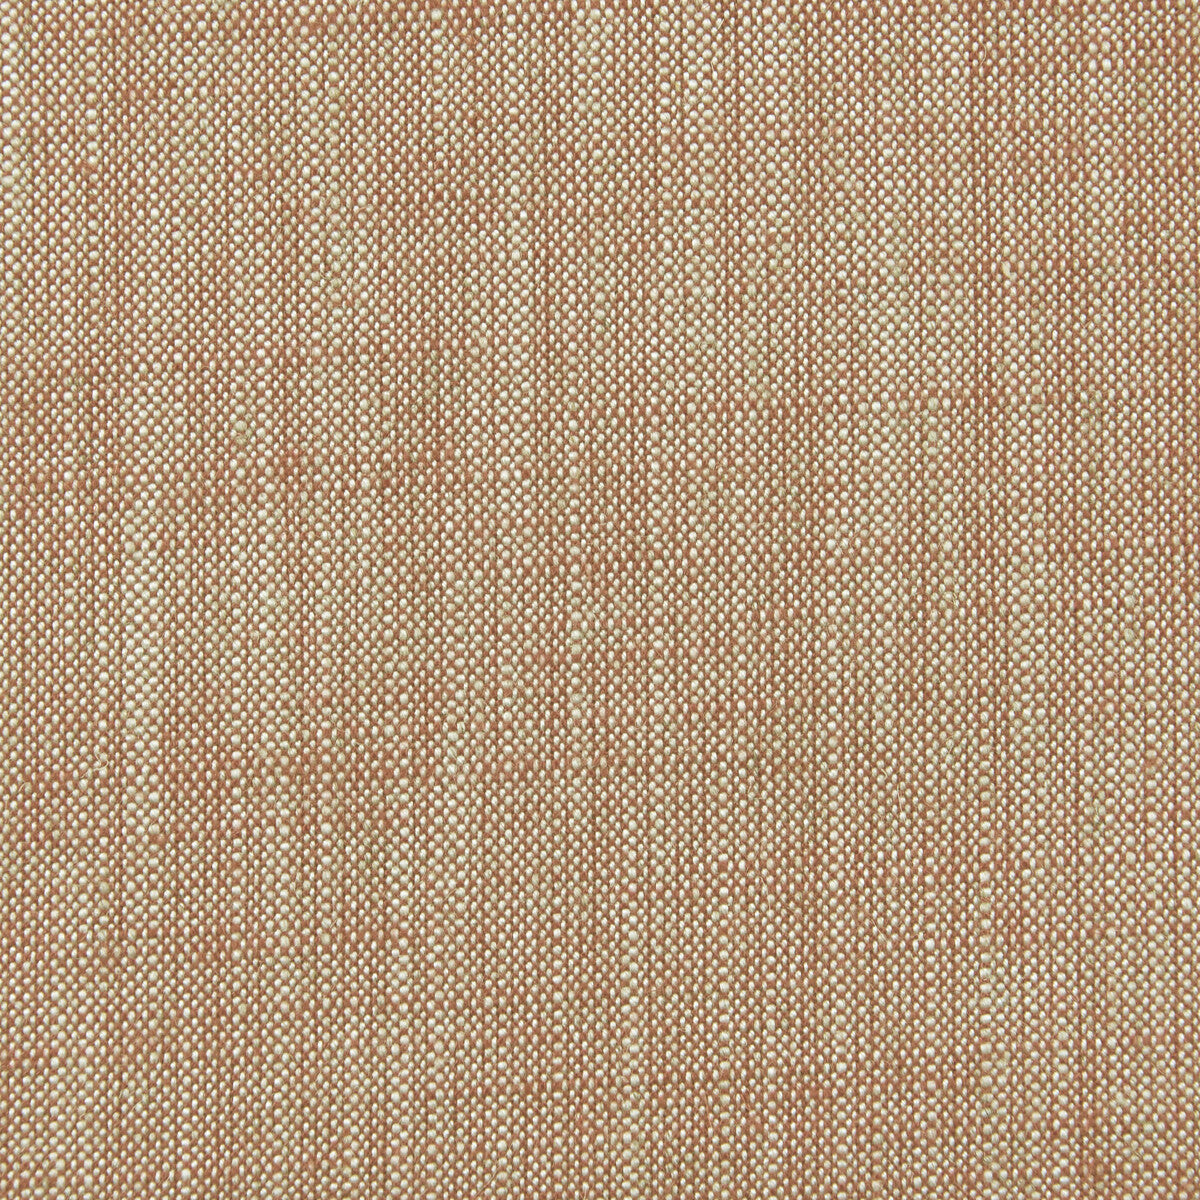 Biarritz fabric in cinnamon color - pattern F0965/10.CAC.0 - by Clarke And Clarke in the Clarke &amp; Clarke Biarritz collection